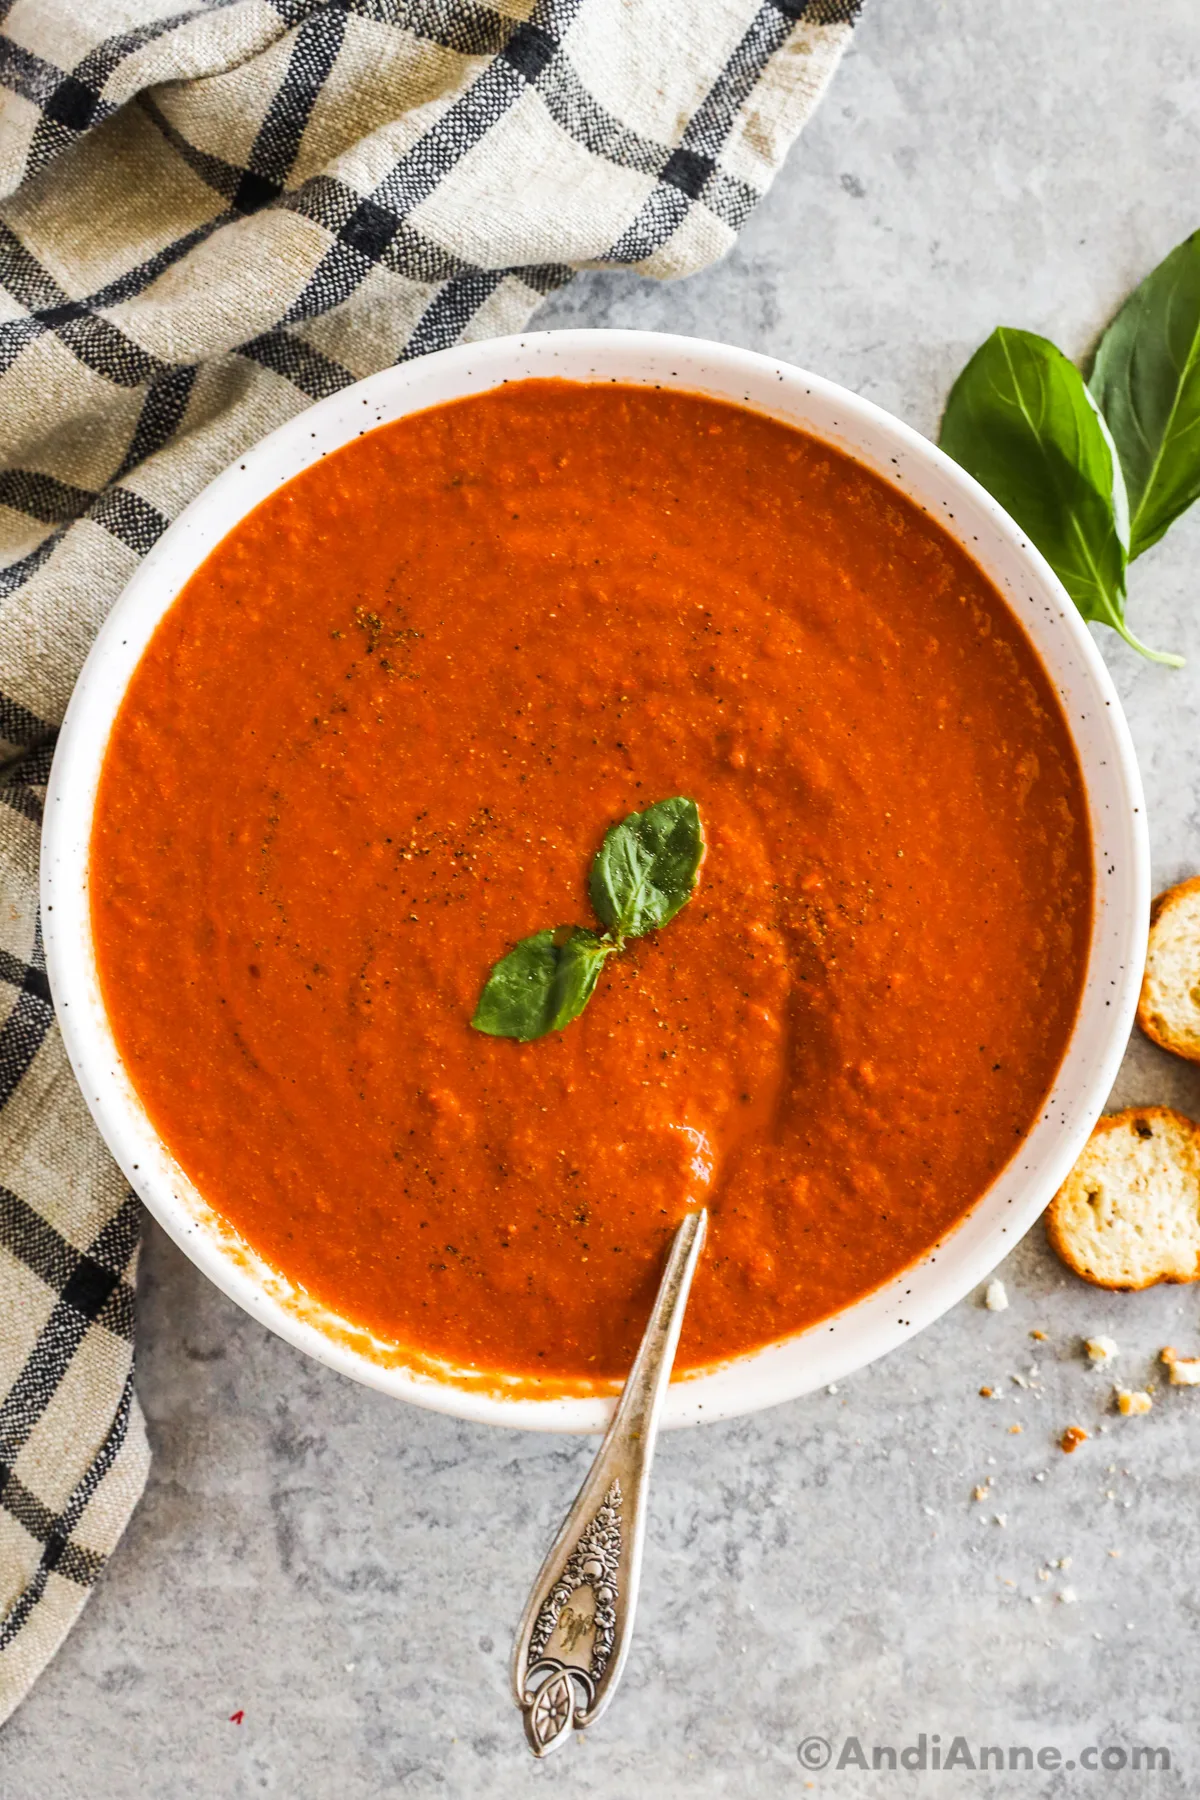 A bowl of roasted tomato basil soup garnished with fresh basil and crackers beside the bowl.